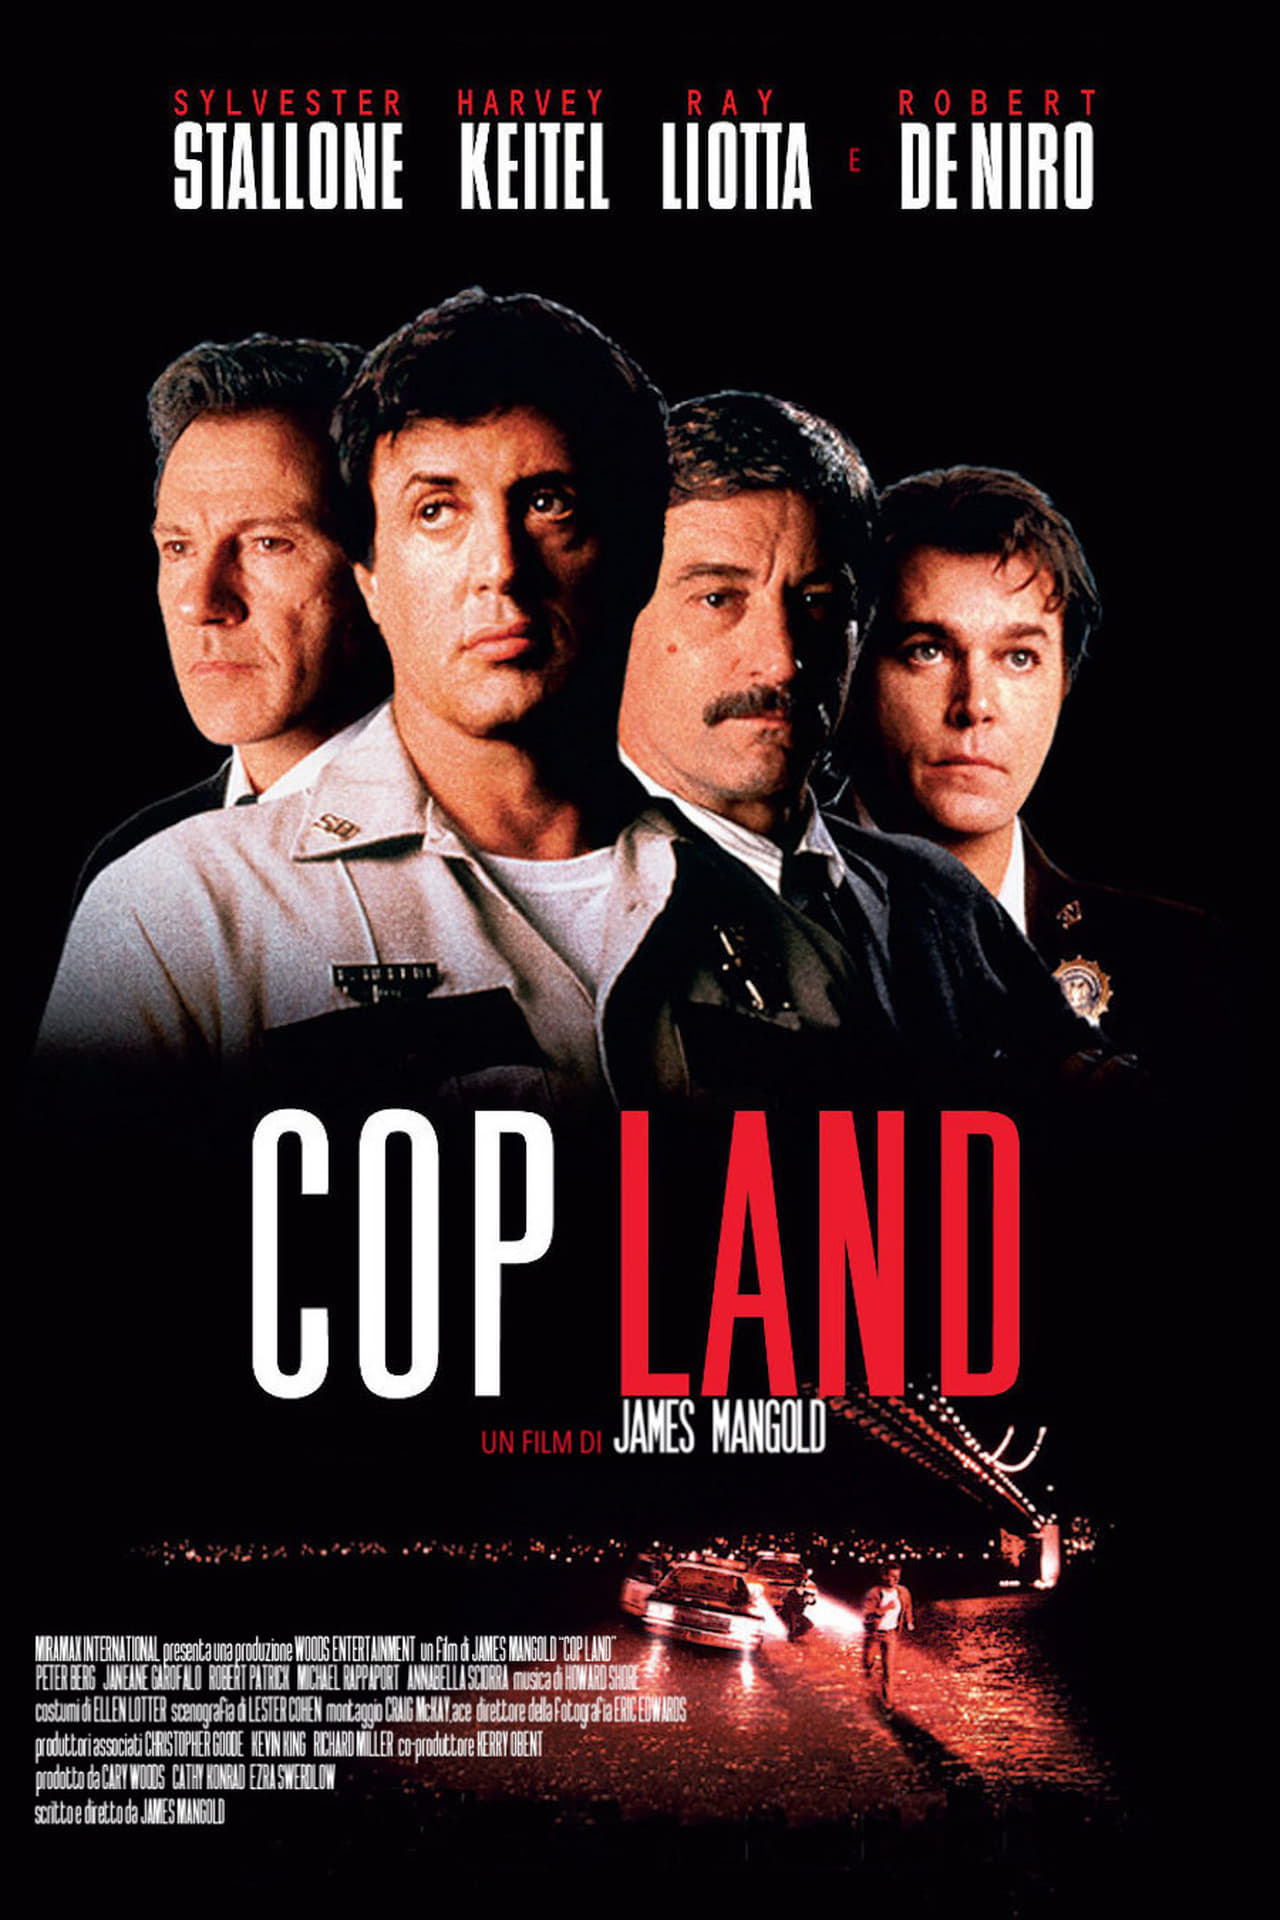 cop land movie review